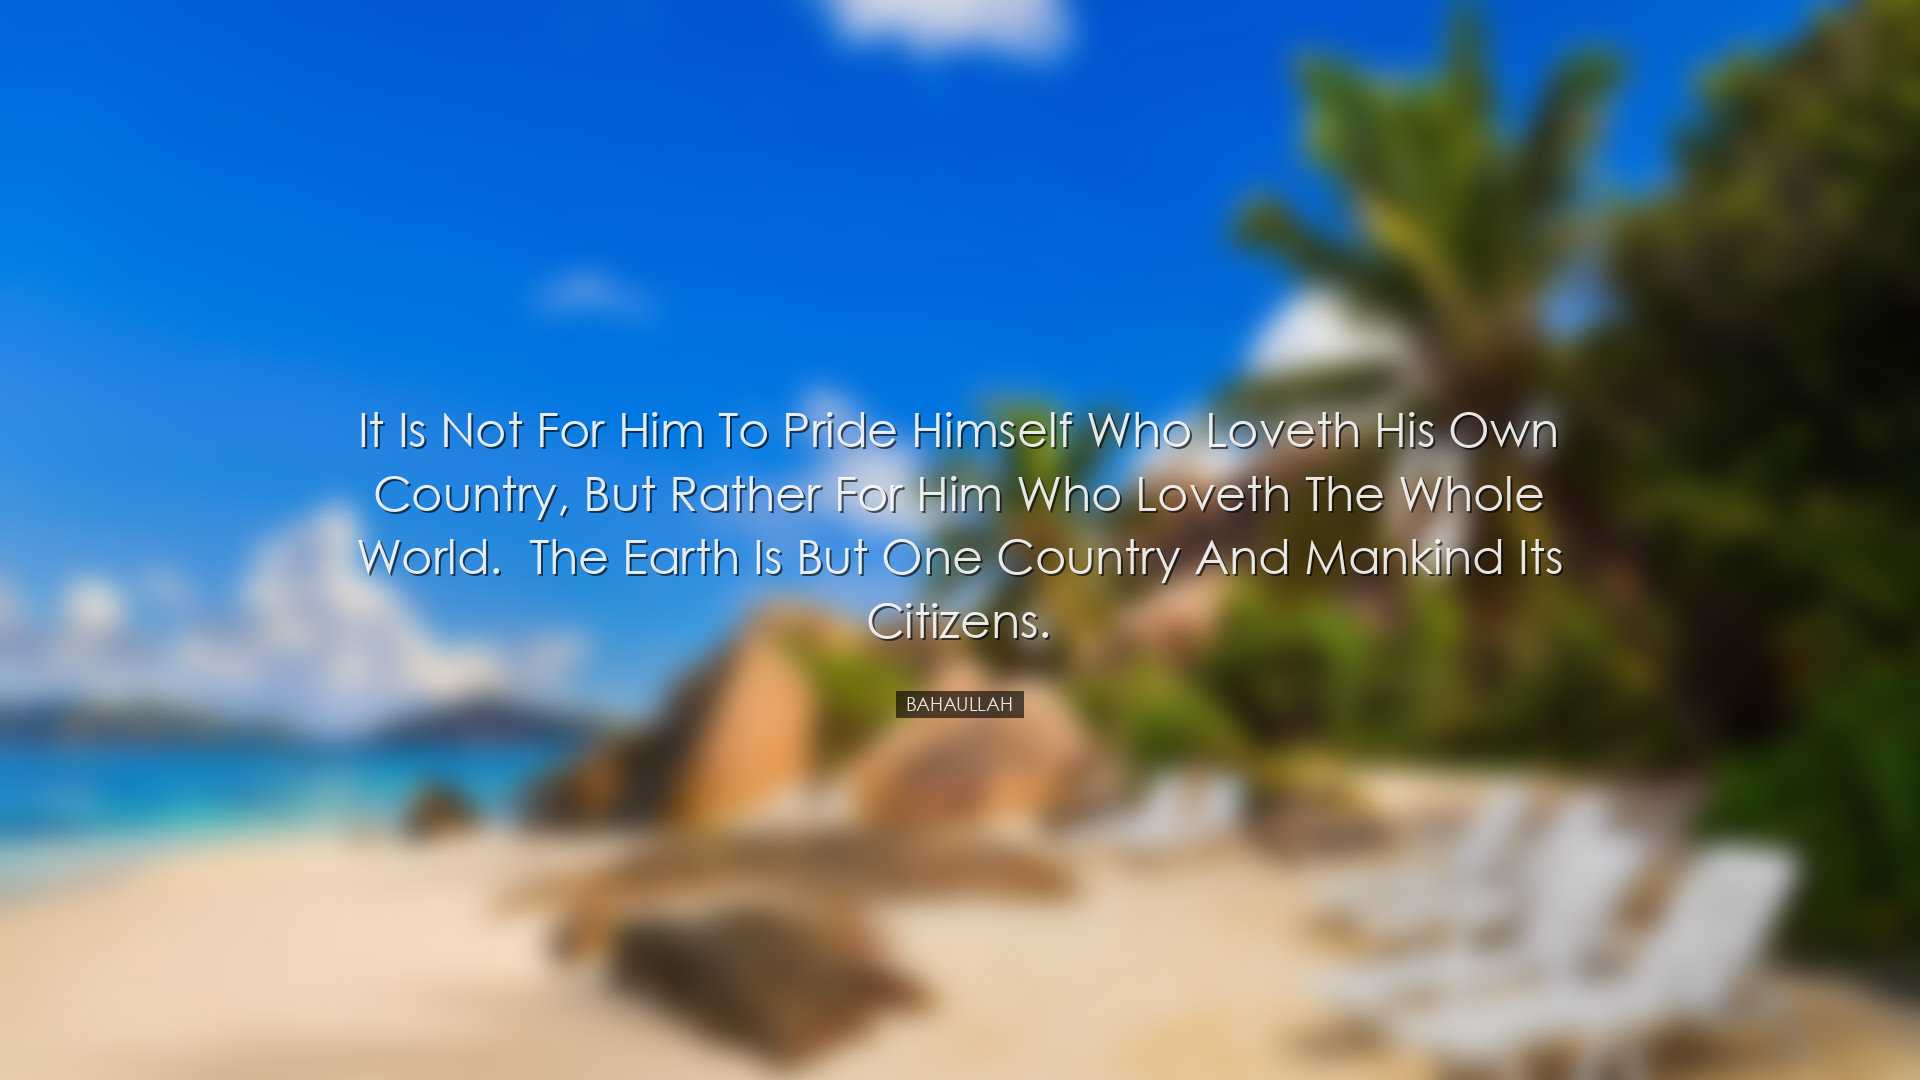 It is not for him to pride himself who loveth his own country, but